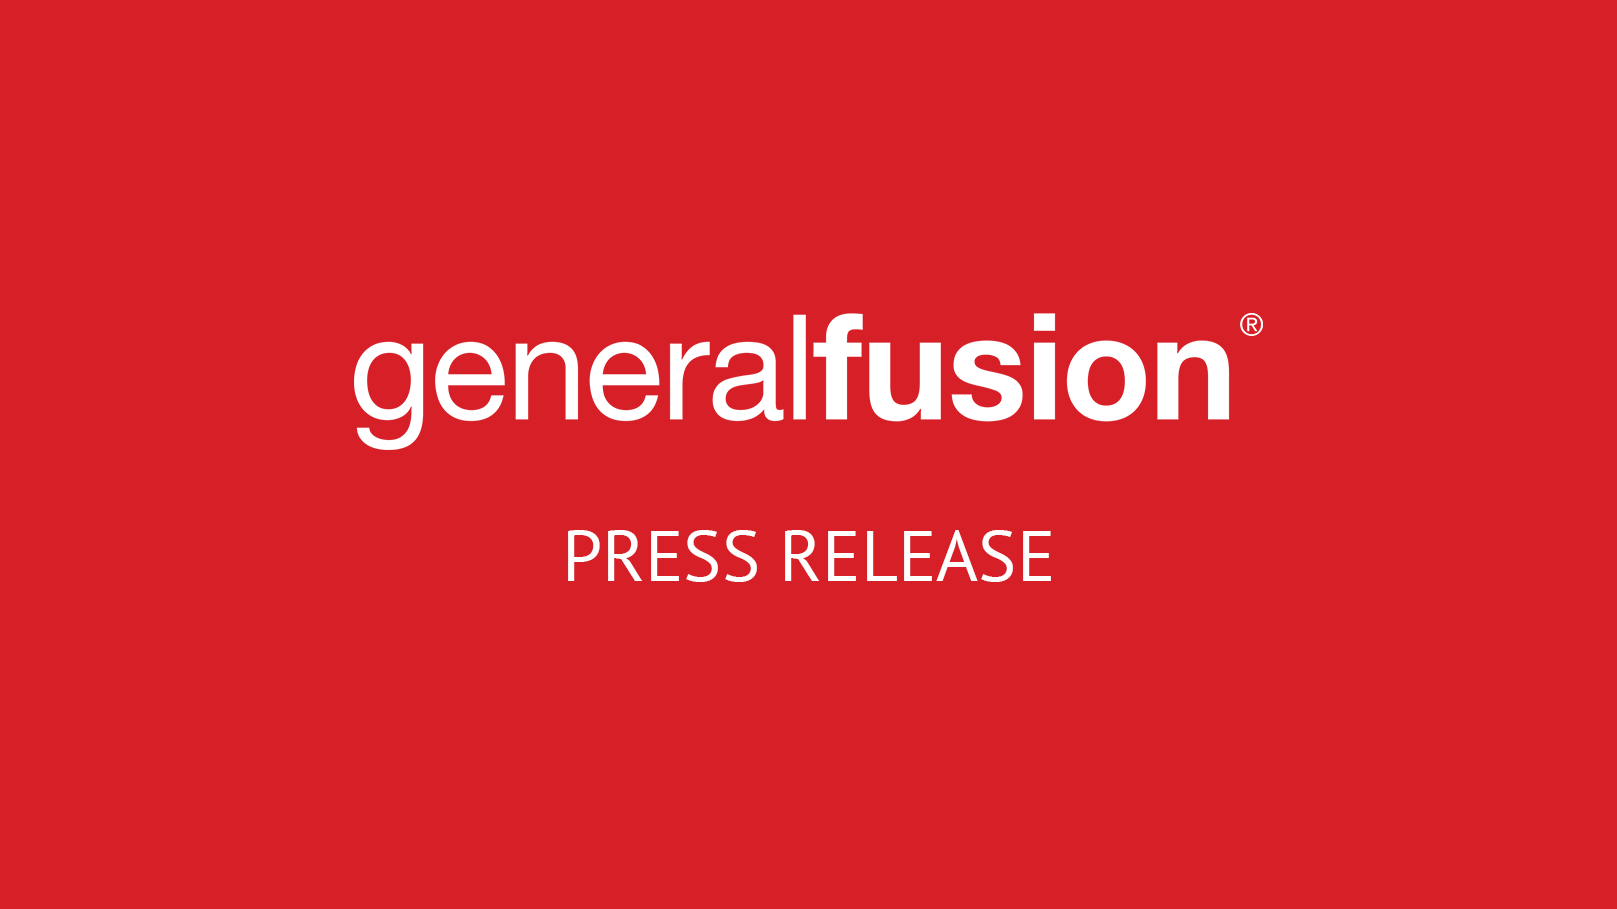 General Fusion enters strategic partnership with Hatch